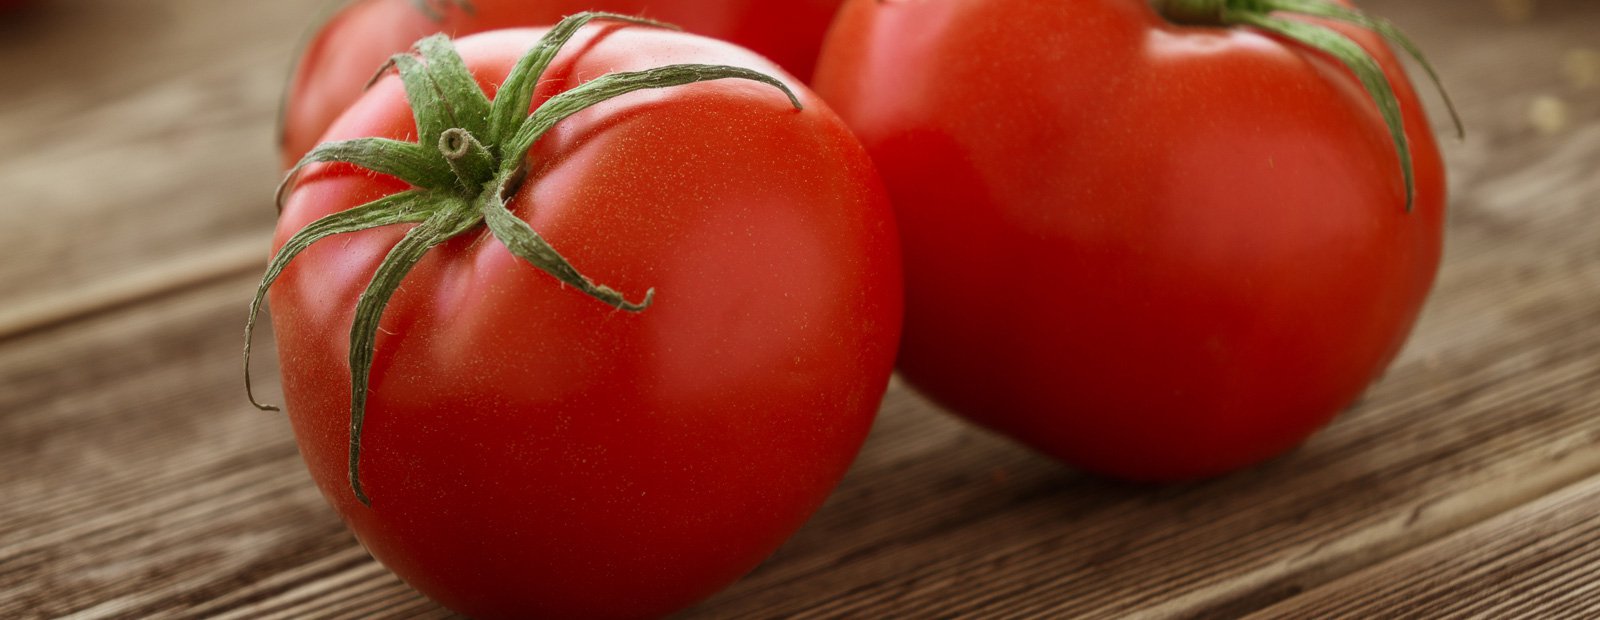 Health and tomatoes: low-calorie recipes